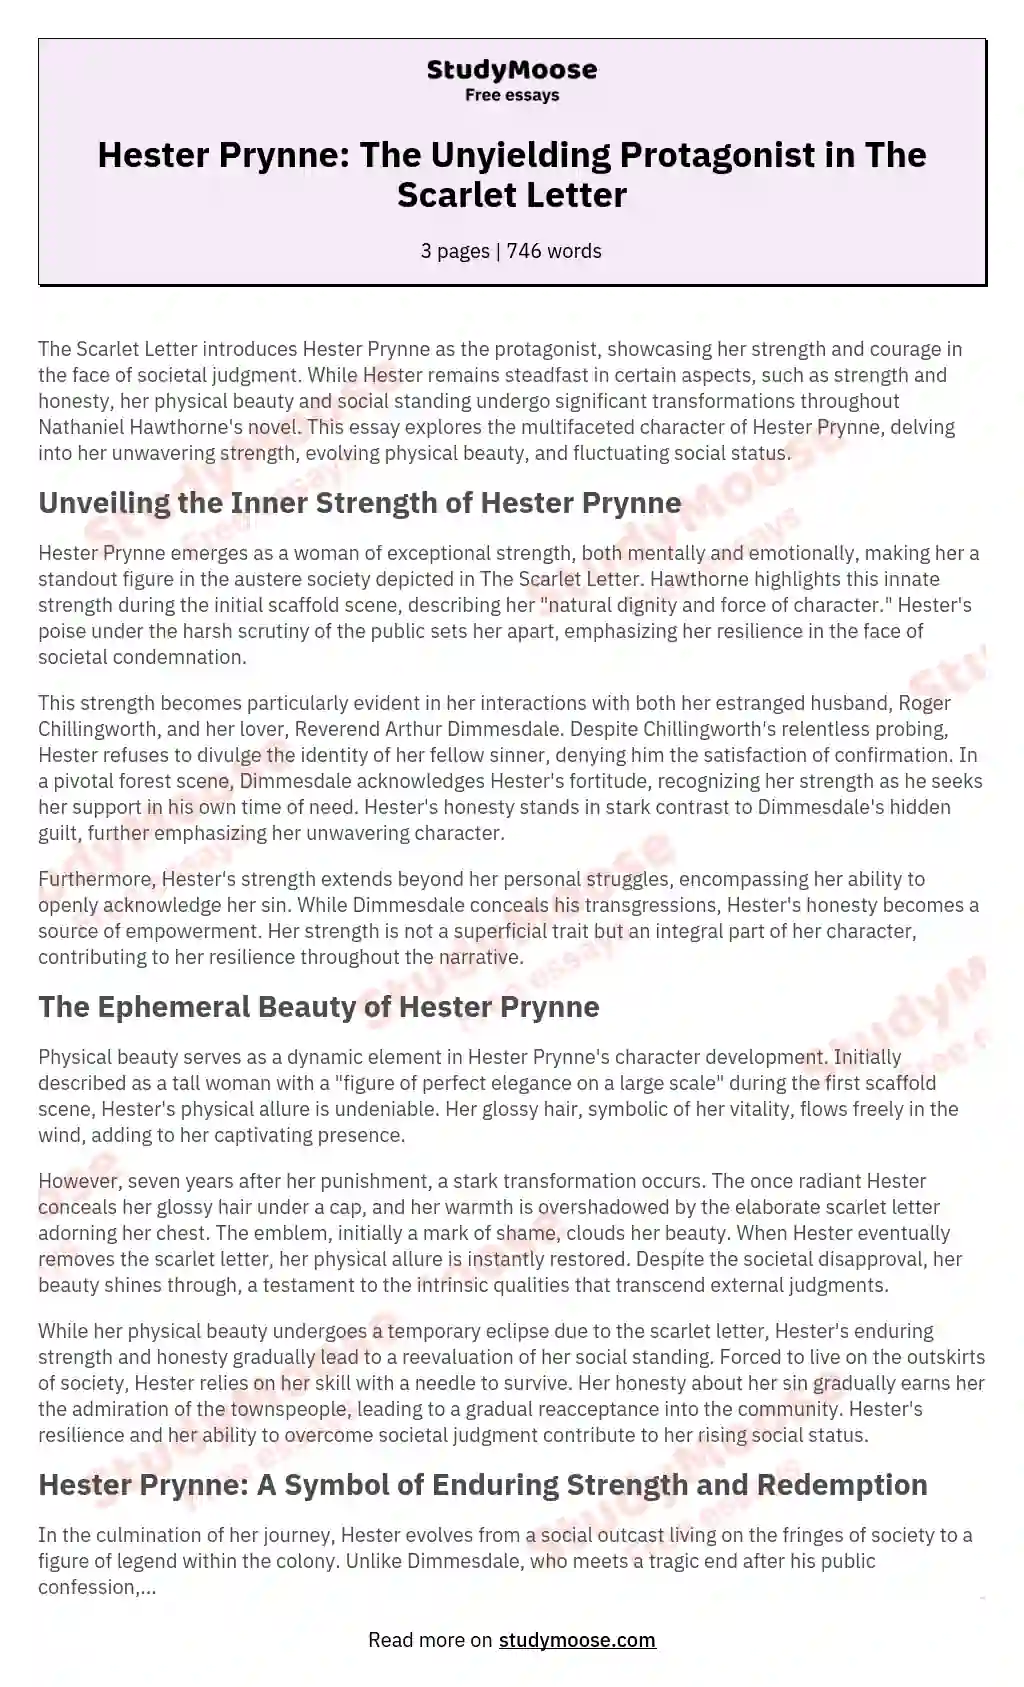 Hester Prynne: The Unyielding Protagonist in The Scarlet Letter essay